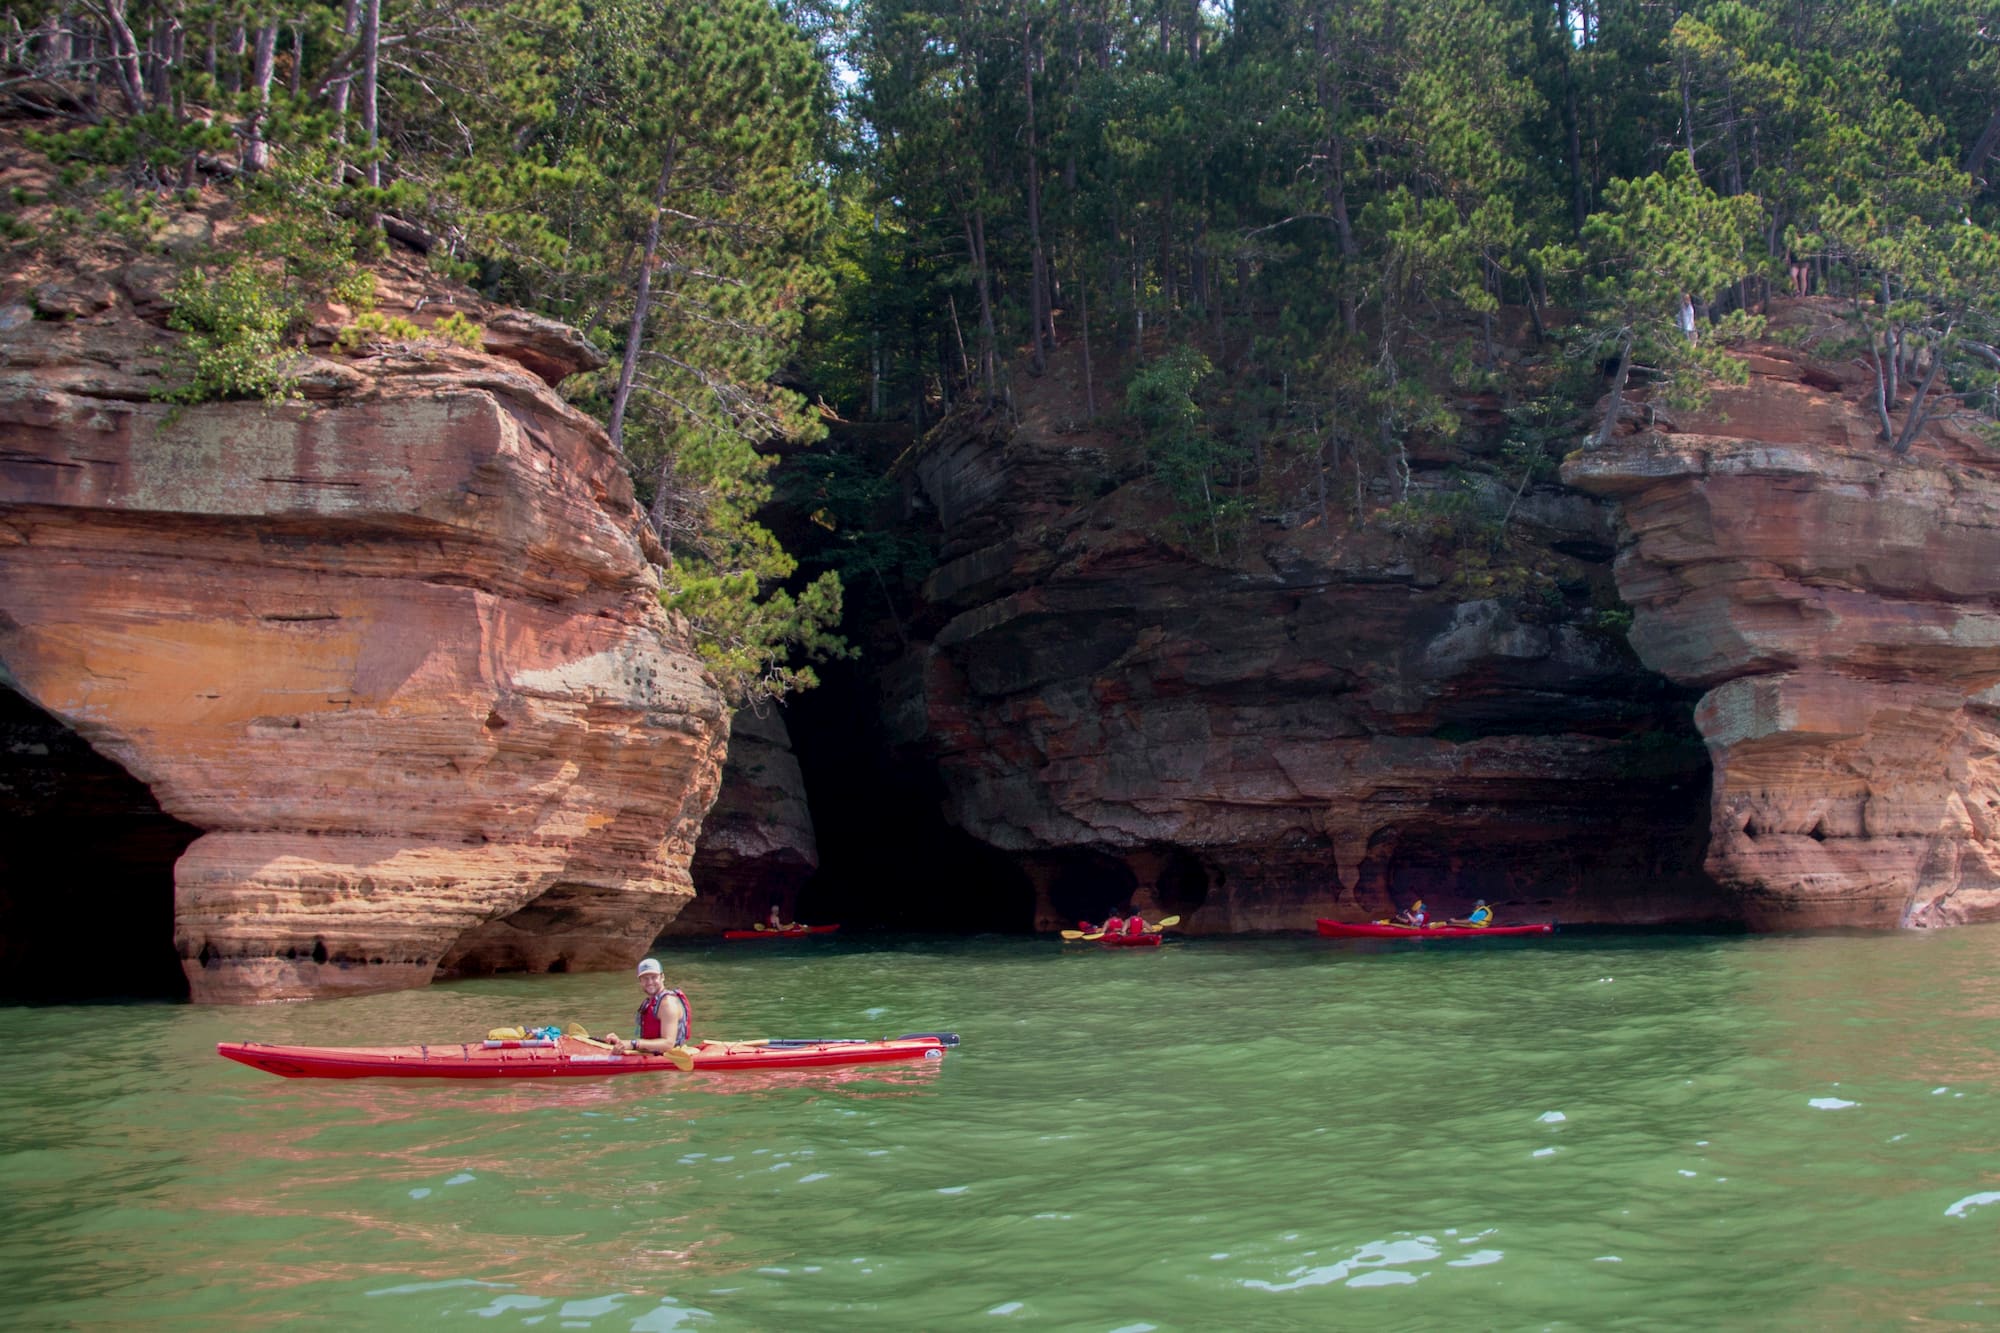 long distance shot of kayaker in red kayak on green water with red rocks behind them